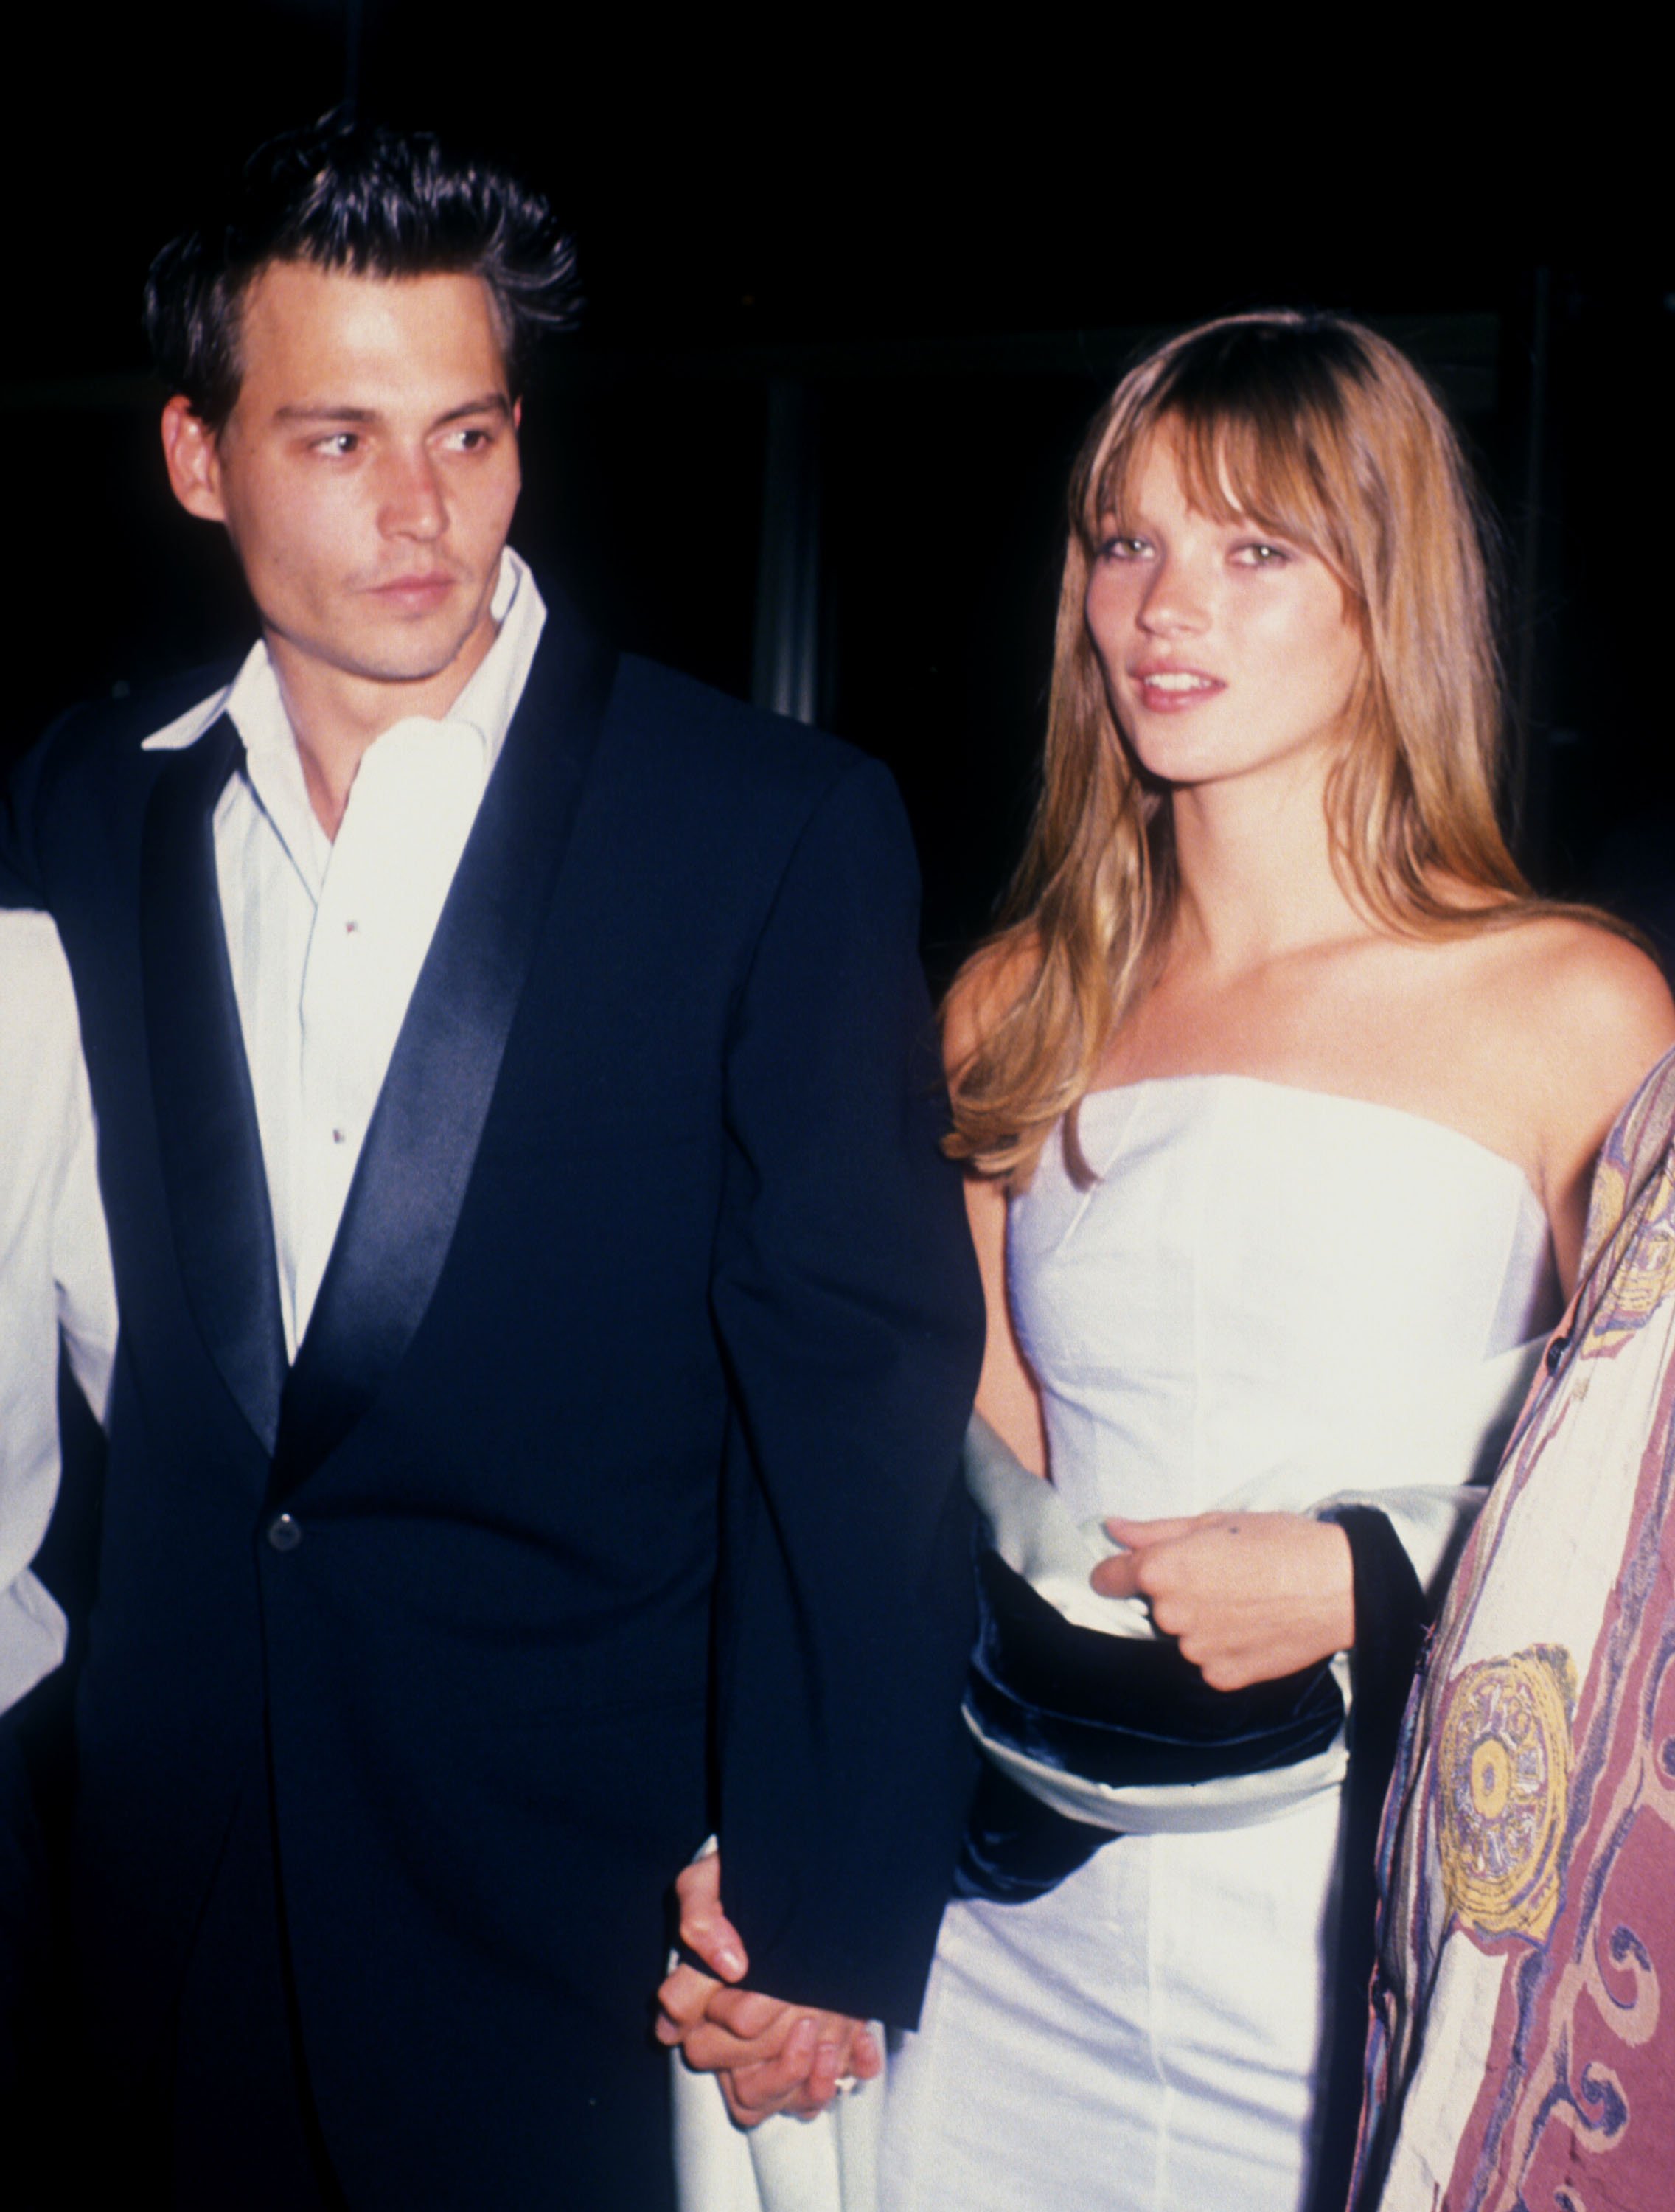 Johnny Depp holds Kate Moss's hand while walking at an undisclosed location on April 3, 1995. | Source: Getty Images